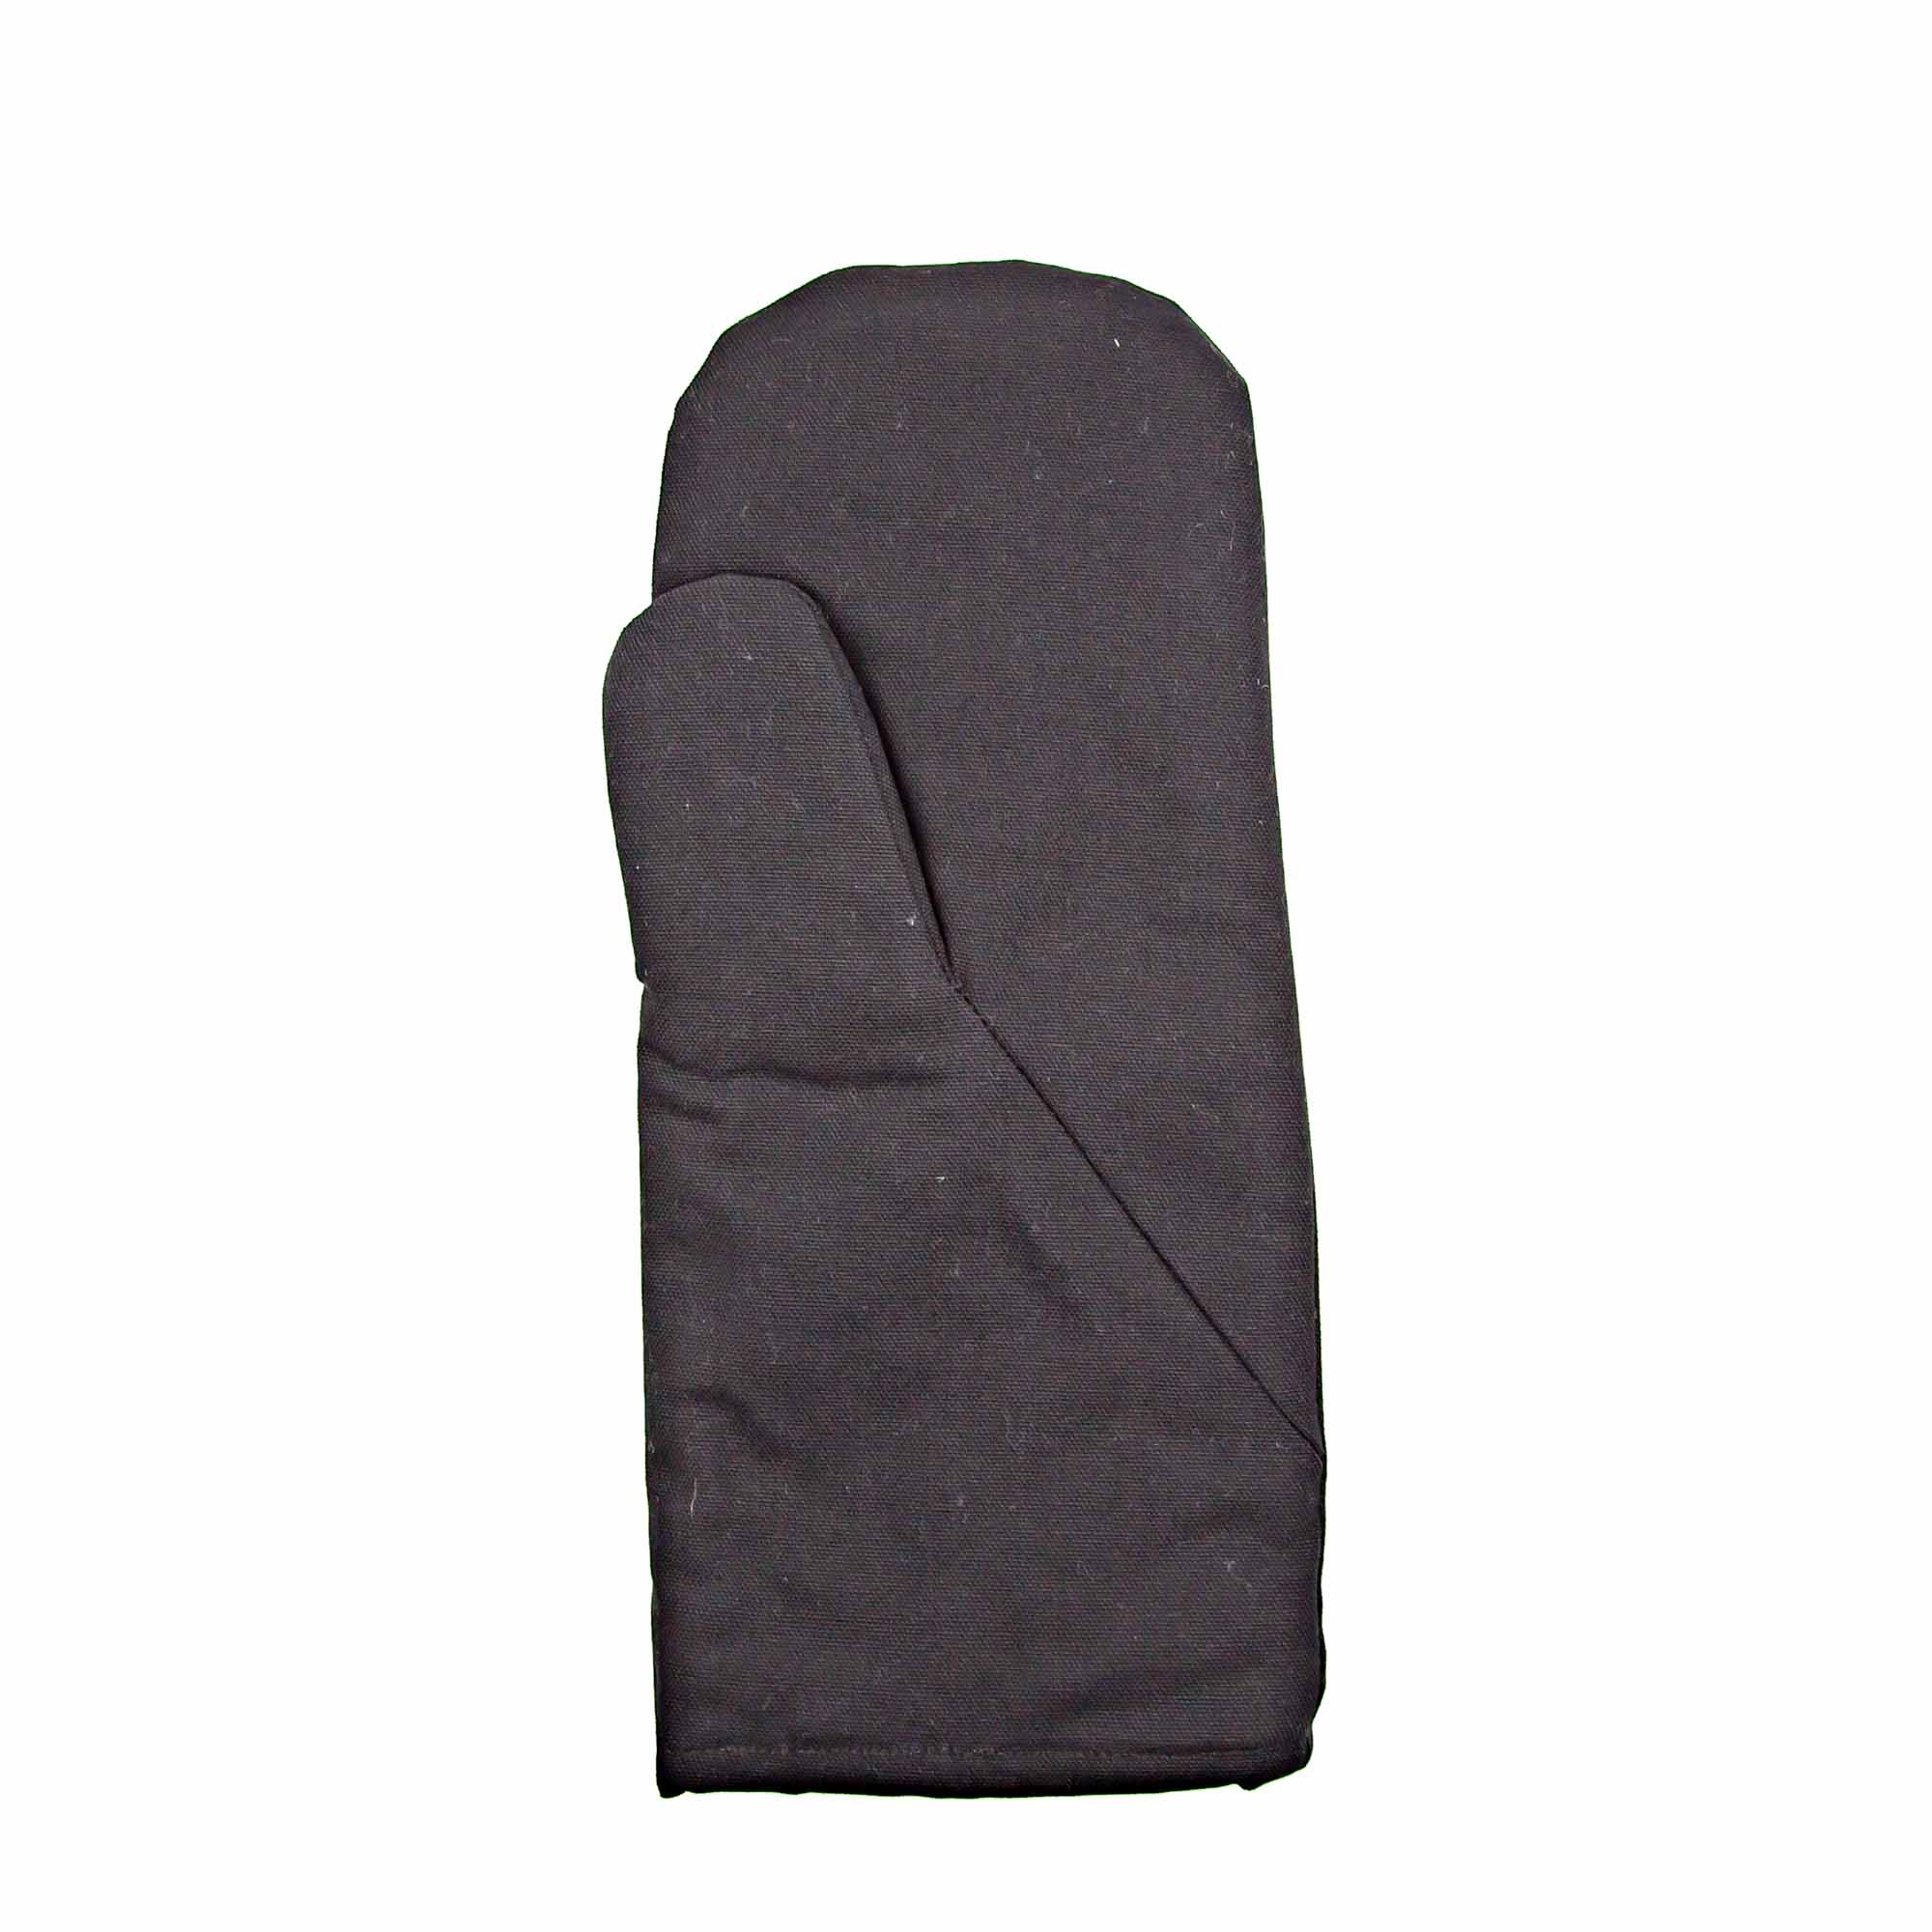 The Organic Company Oven Mitts Pair - Black Large